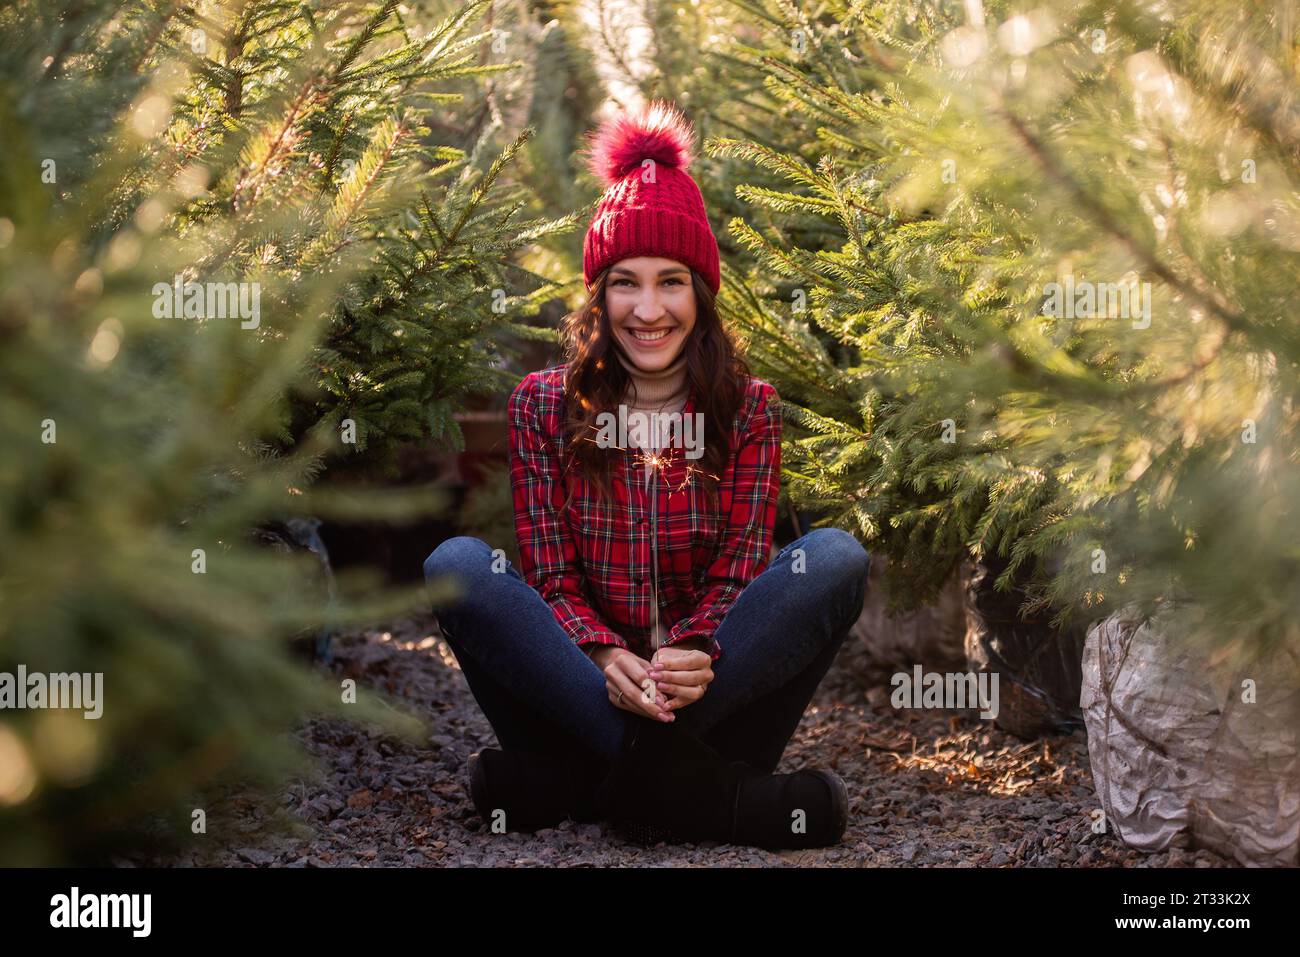 Young woman with sparkler in hand wearing red checkered shirt, knitted hat among green Christmas tree market. Curly-haired girl laughs and rejoices in Stock Photo